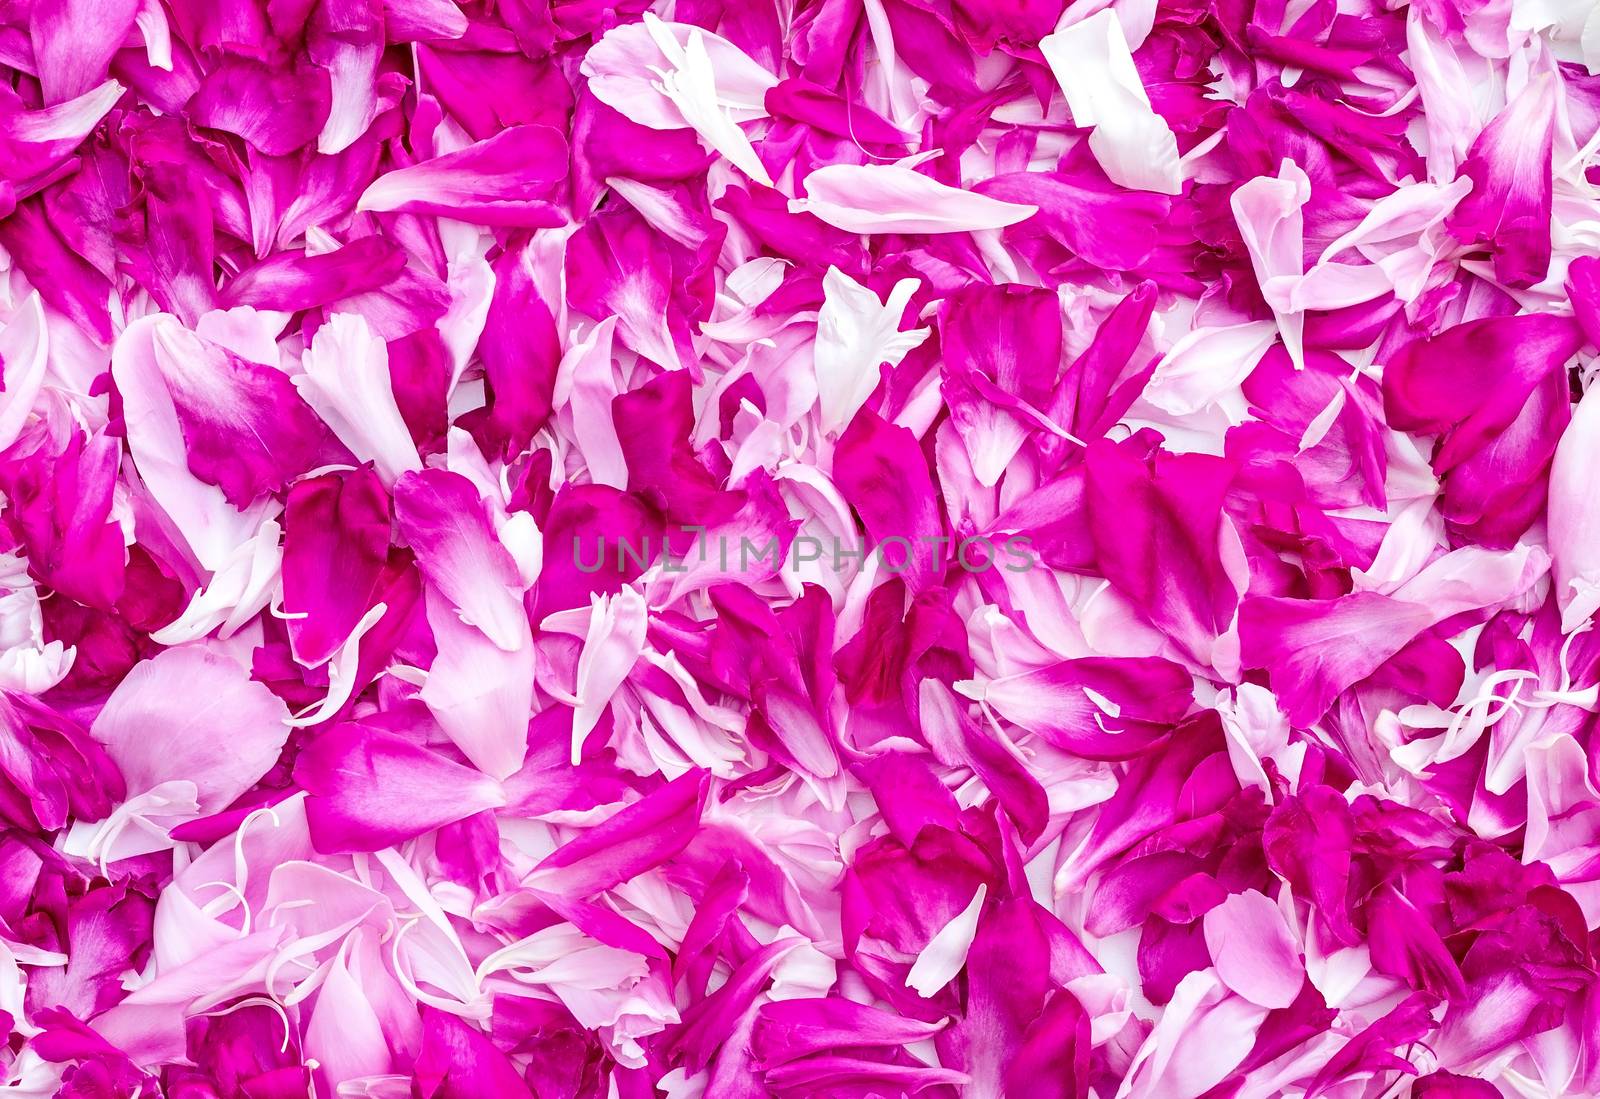 Petals of peonies in a large number, (the background image). by georgina198